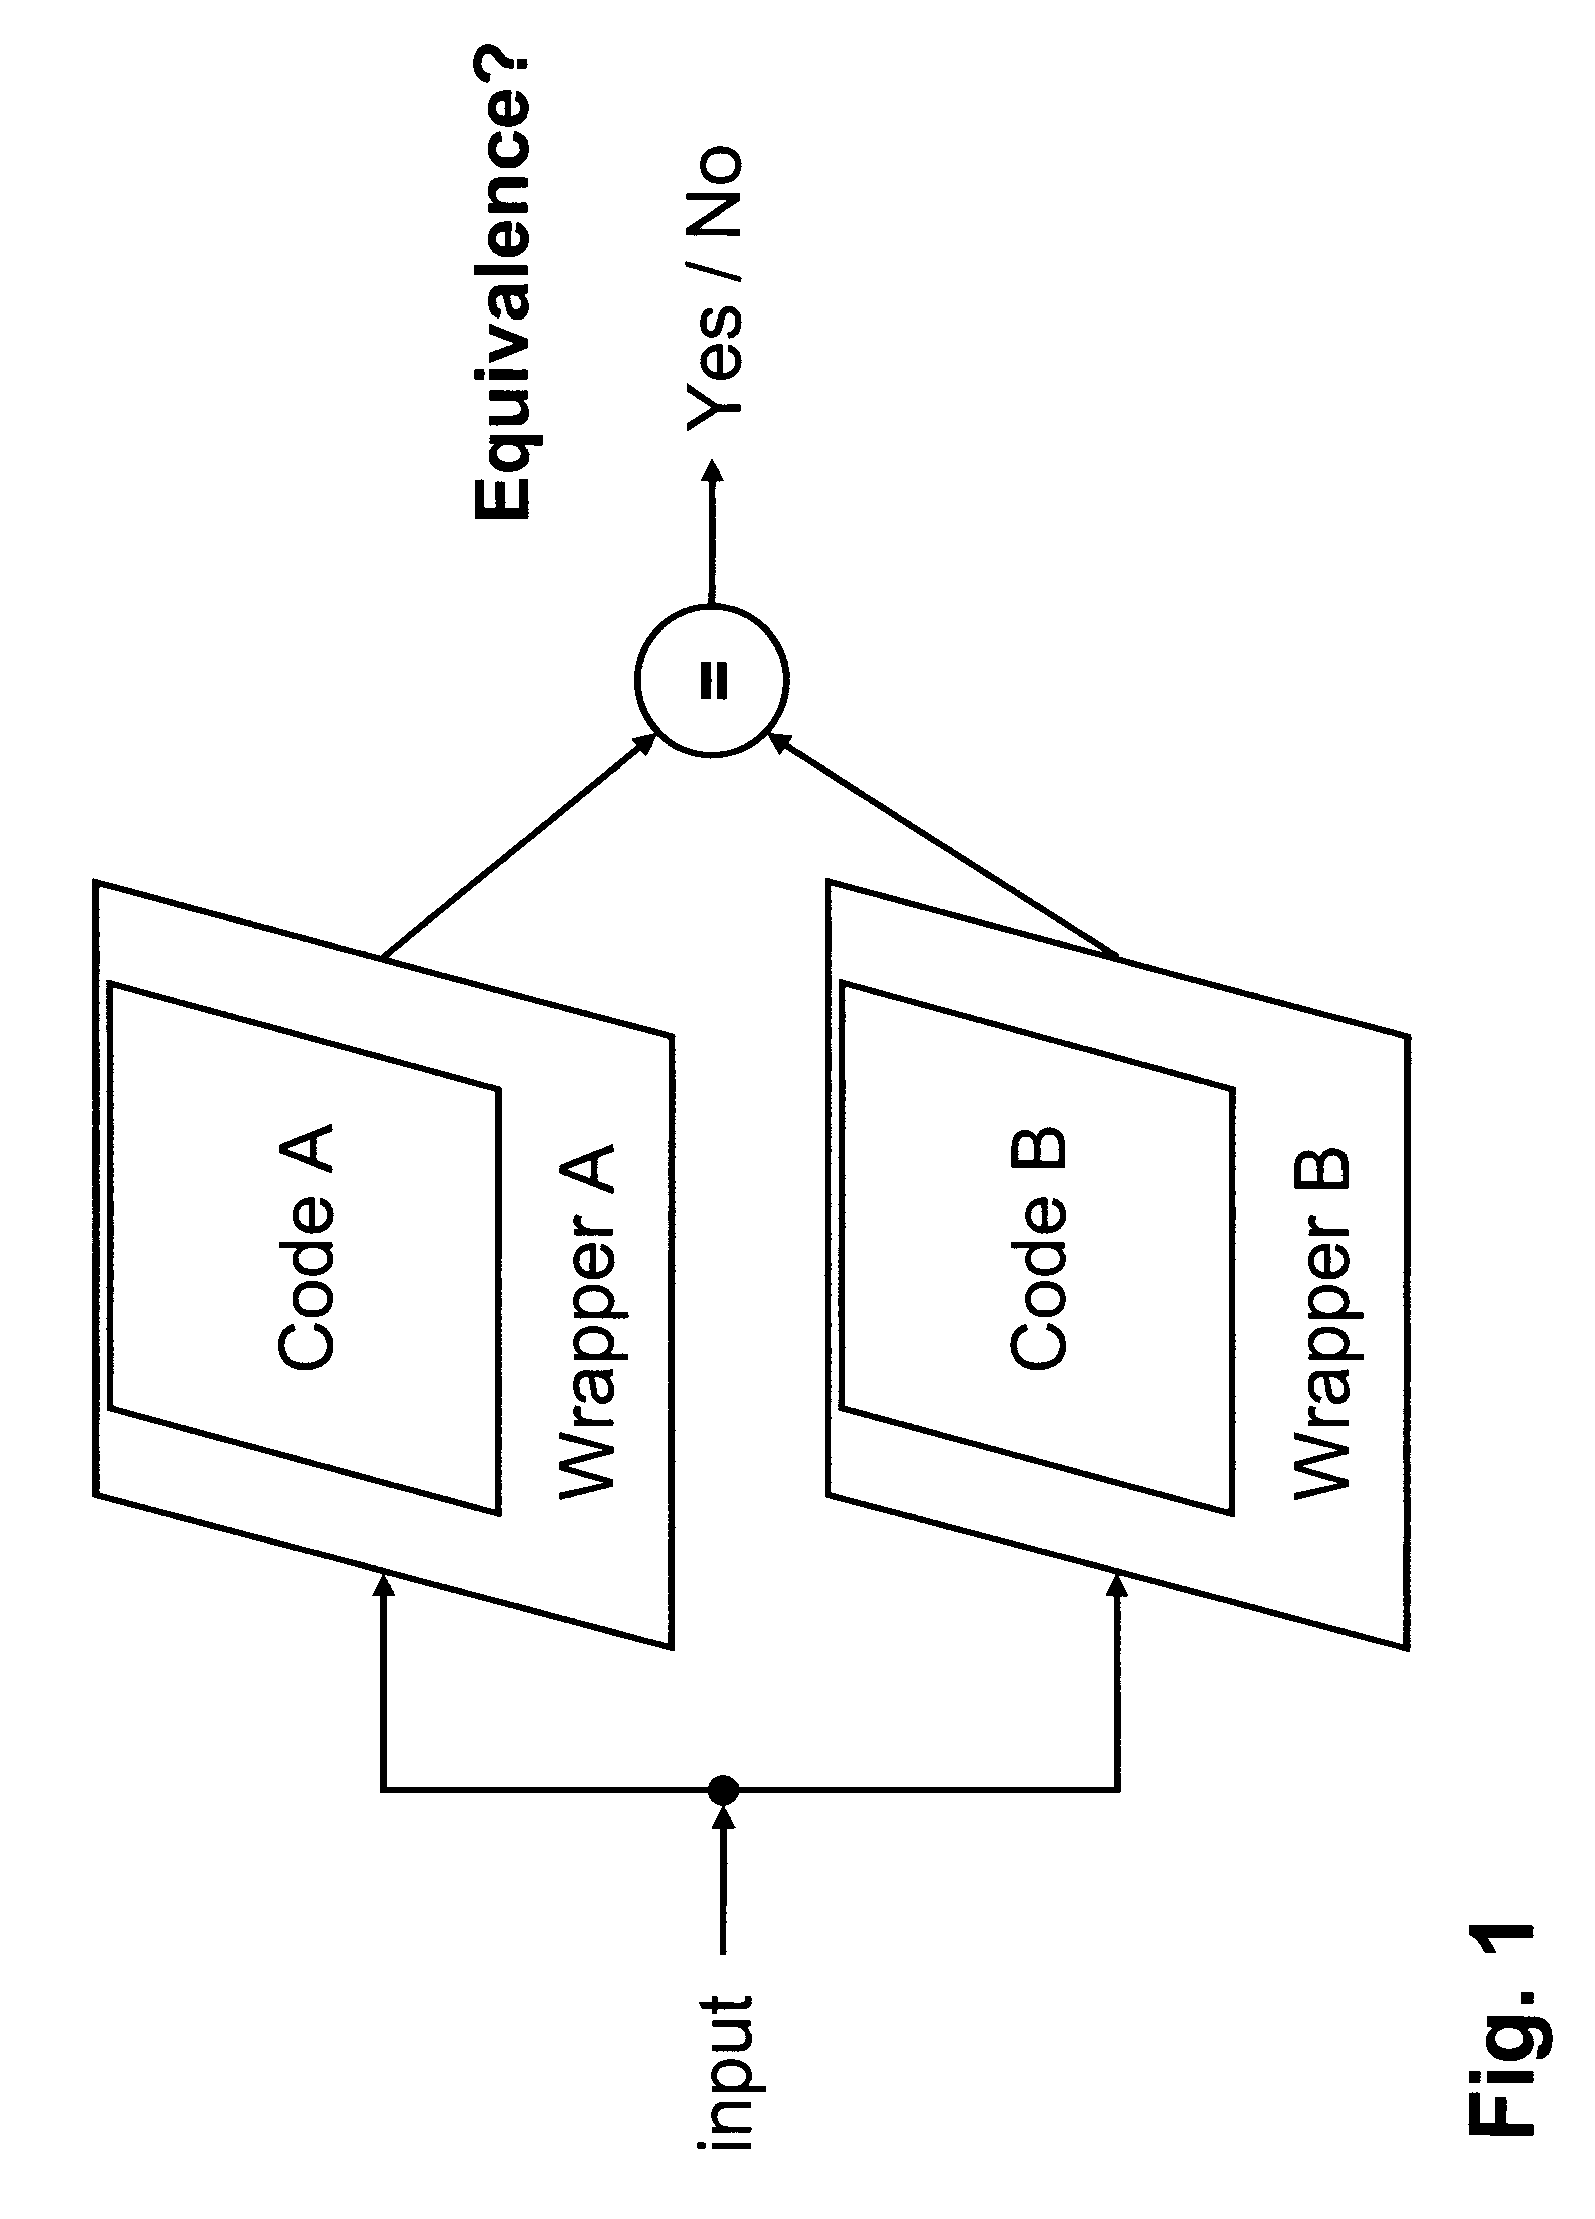 Method and system for verifying the equivalence of digital circuits